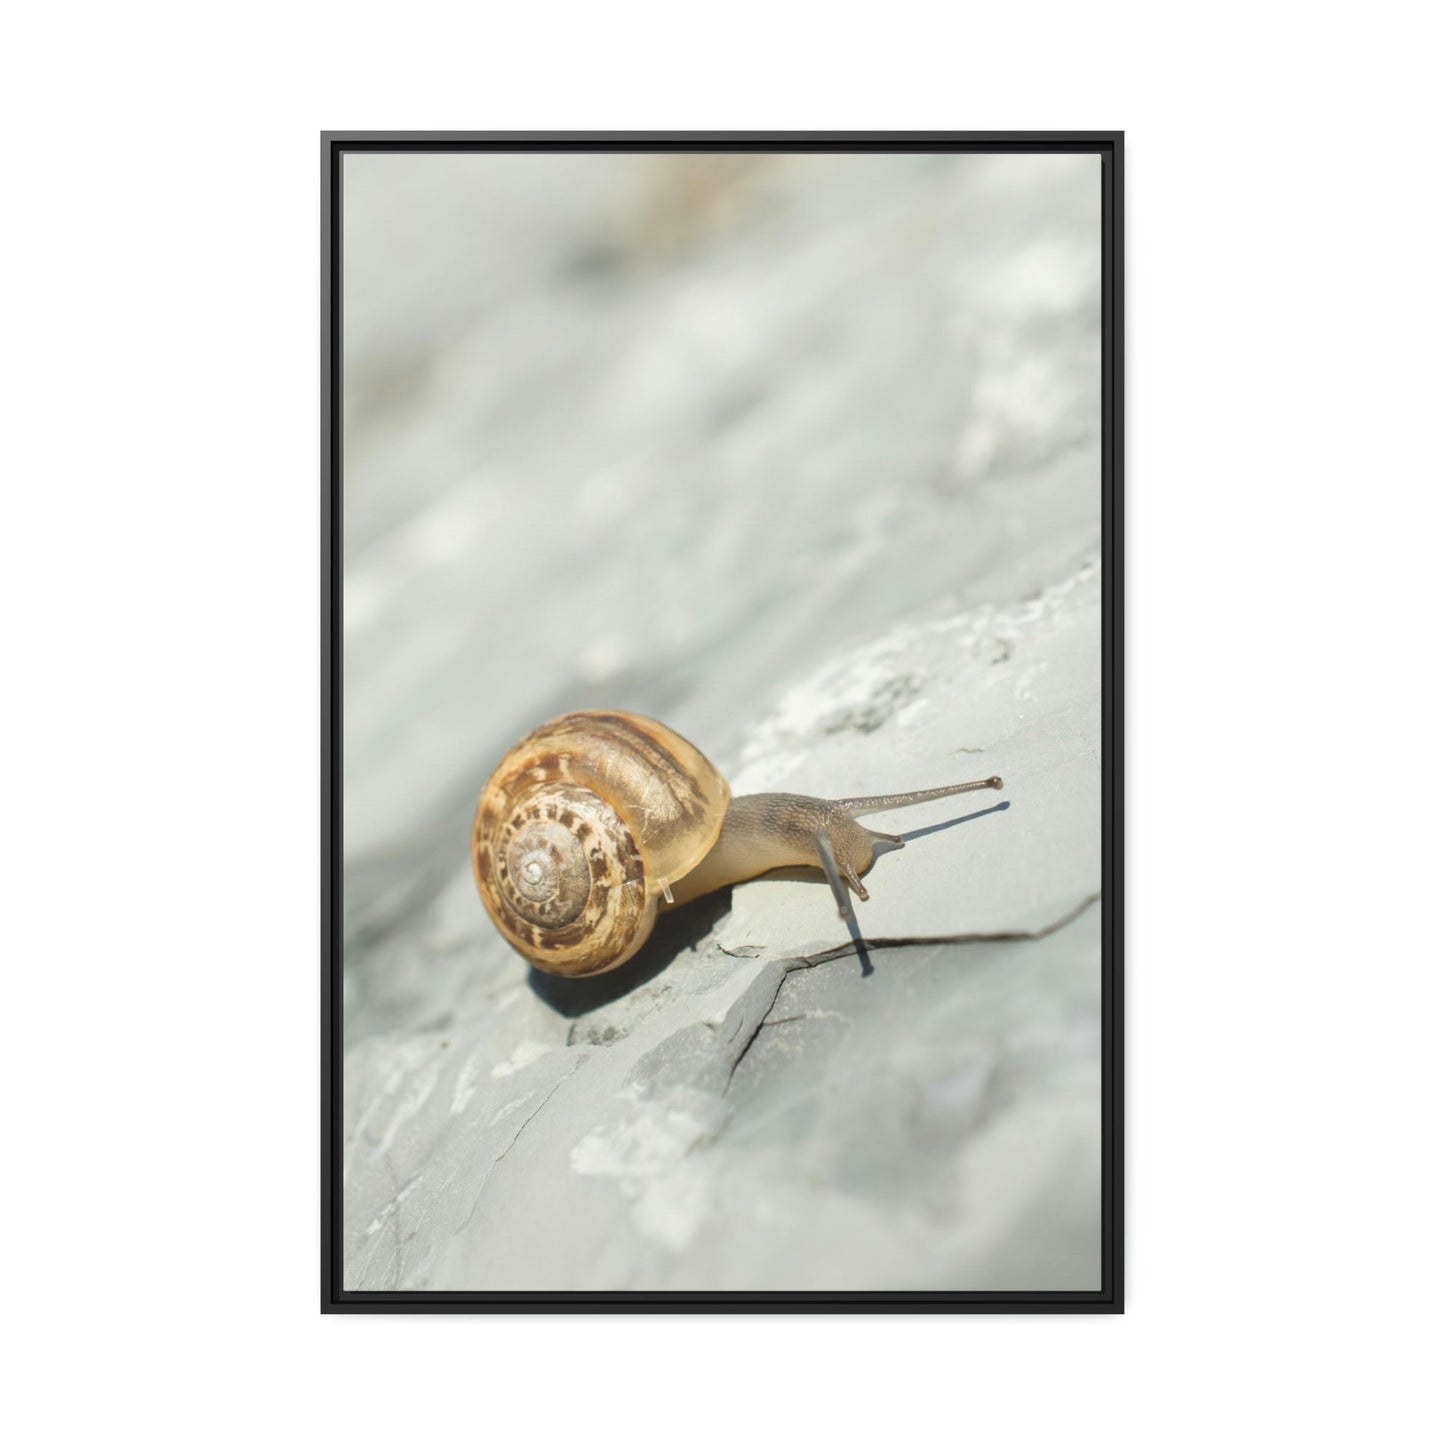 A Snail's World: Life in Slow Motion